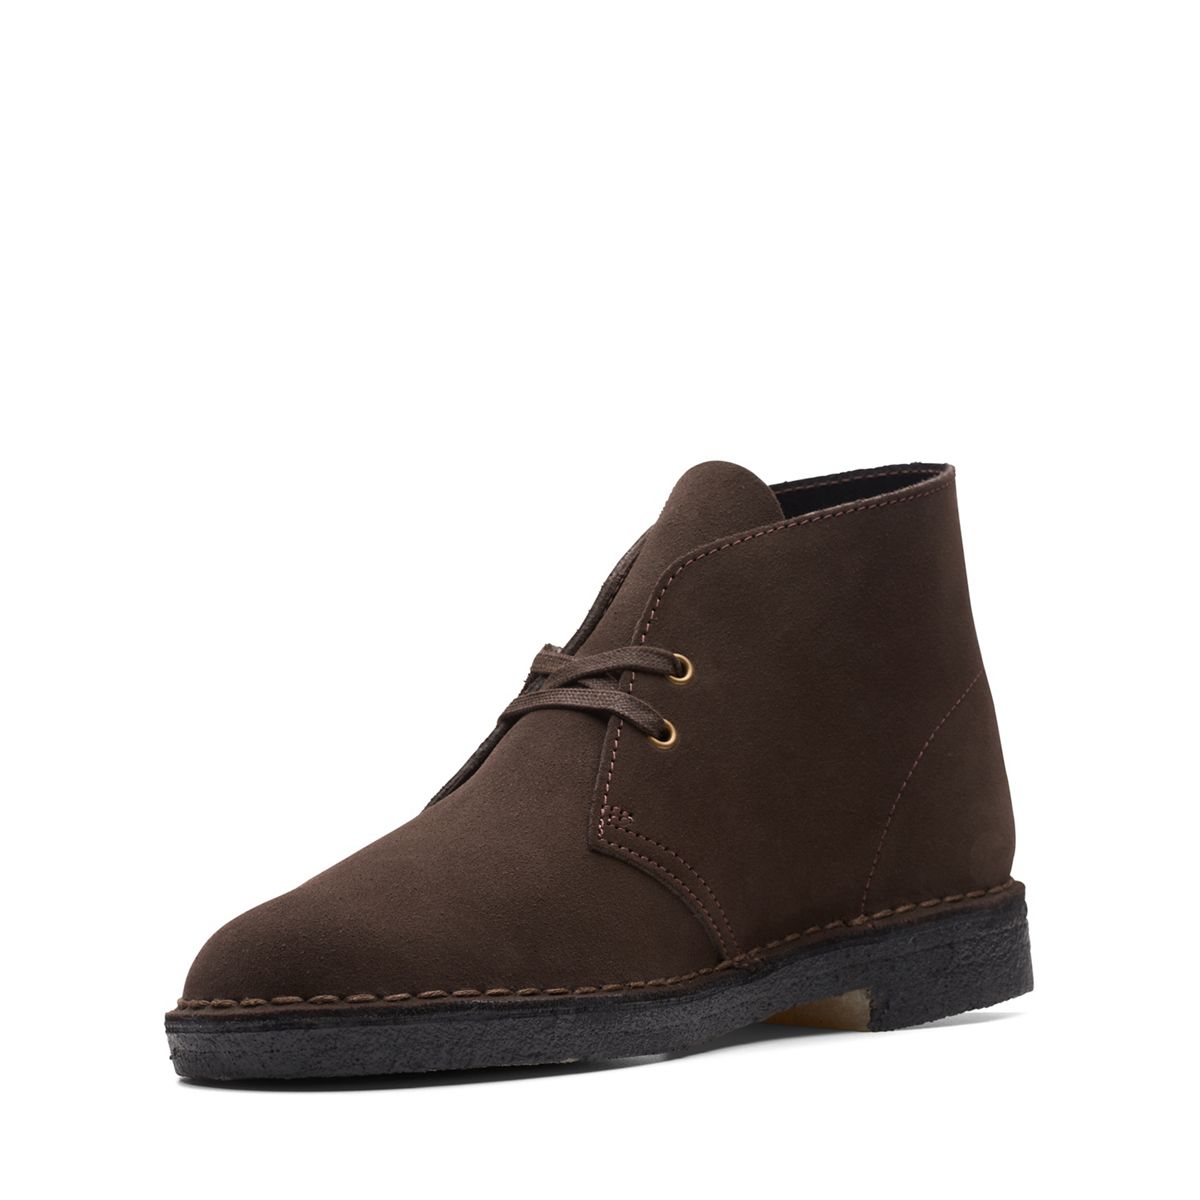 Desert Boot Brown Suede - Clarks Canada Official Site | Shoes